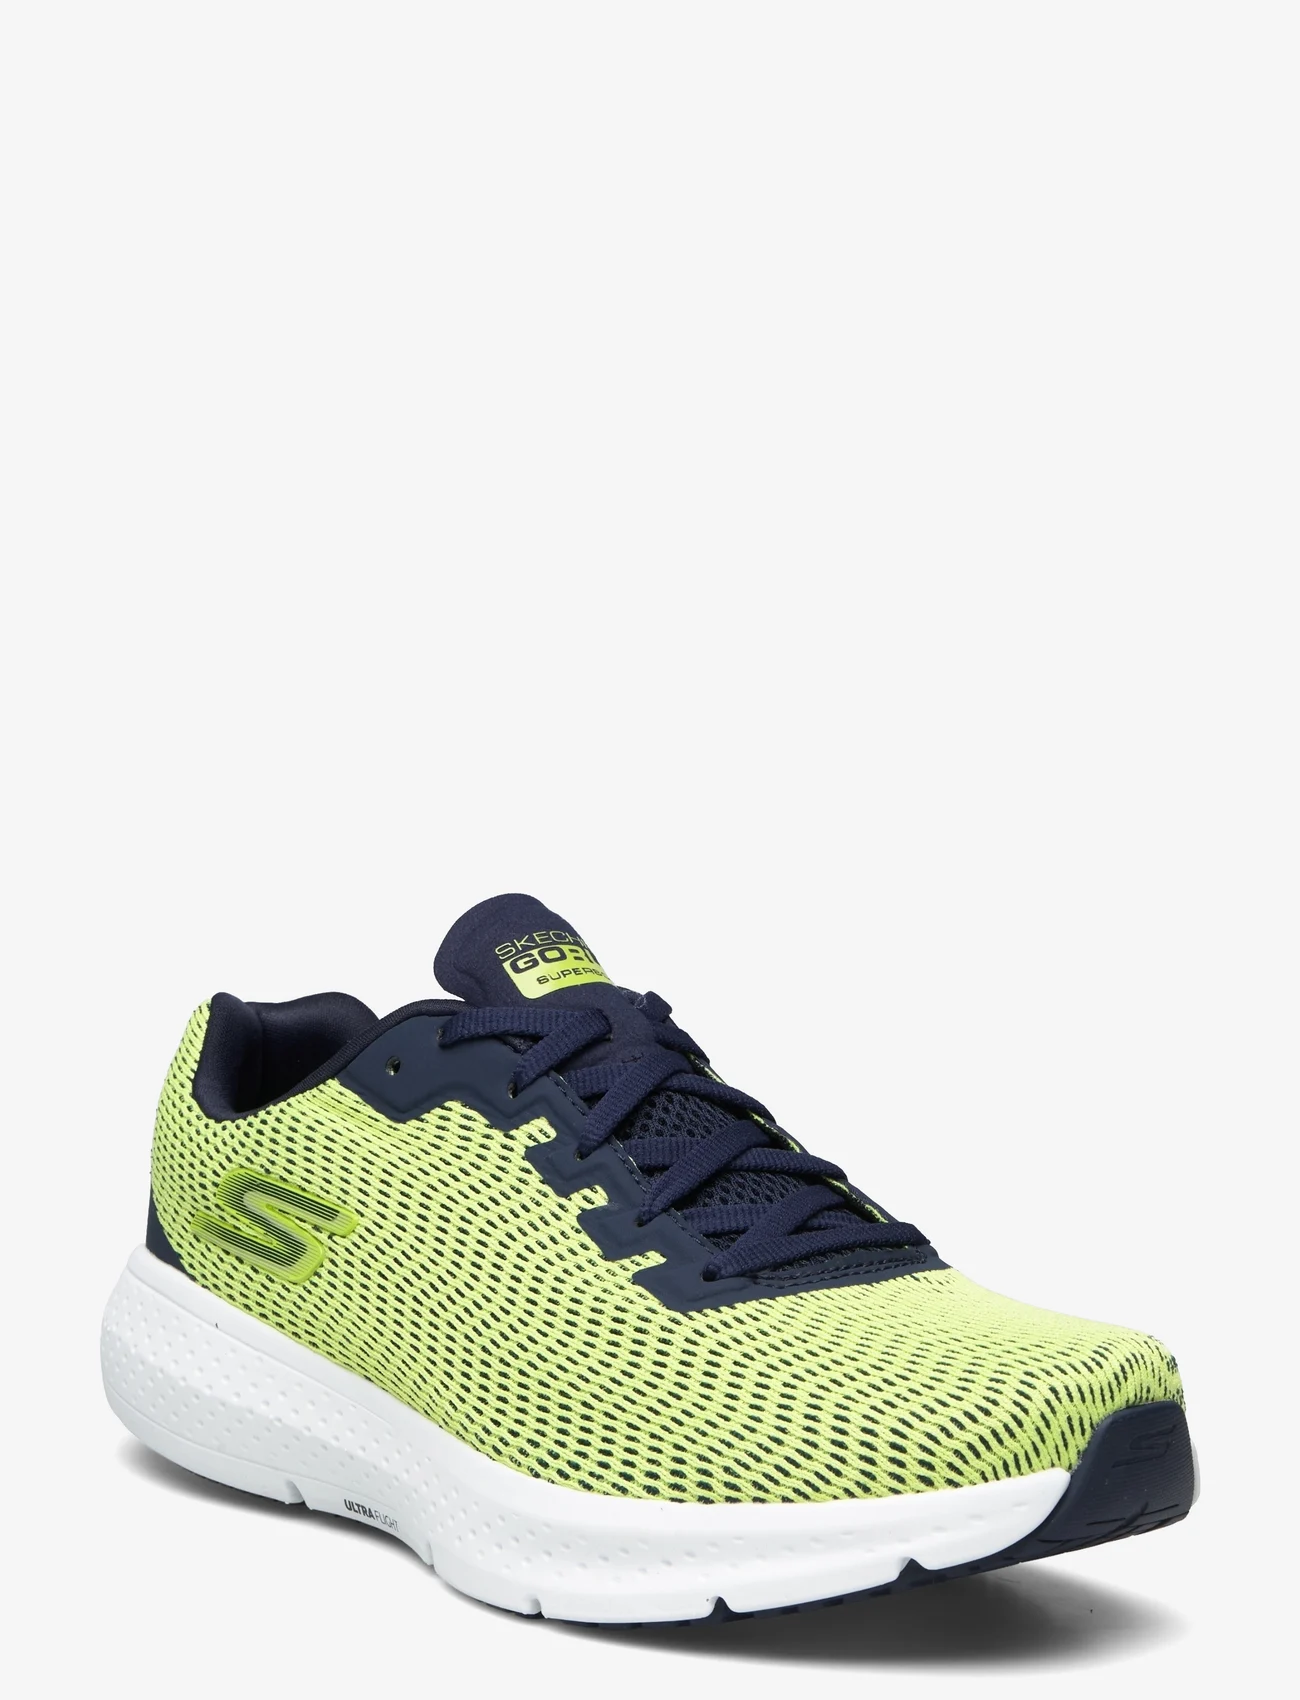 Skechers - Mens Go Run Supersonic  - Relaxed Fit - loopschoenen - ylnv yellow navy - 0